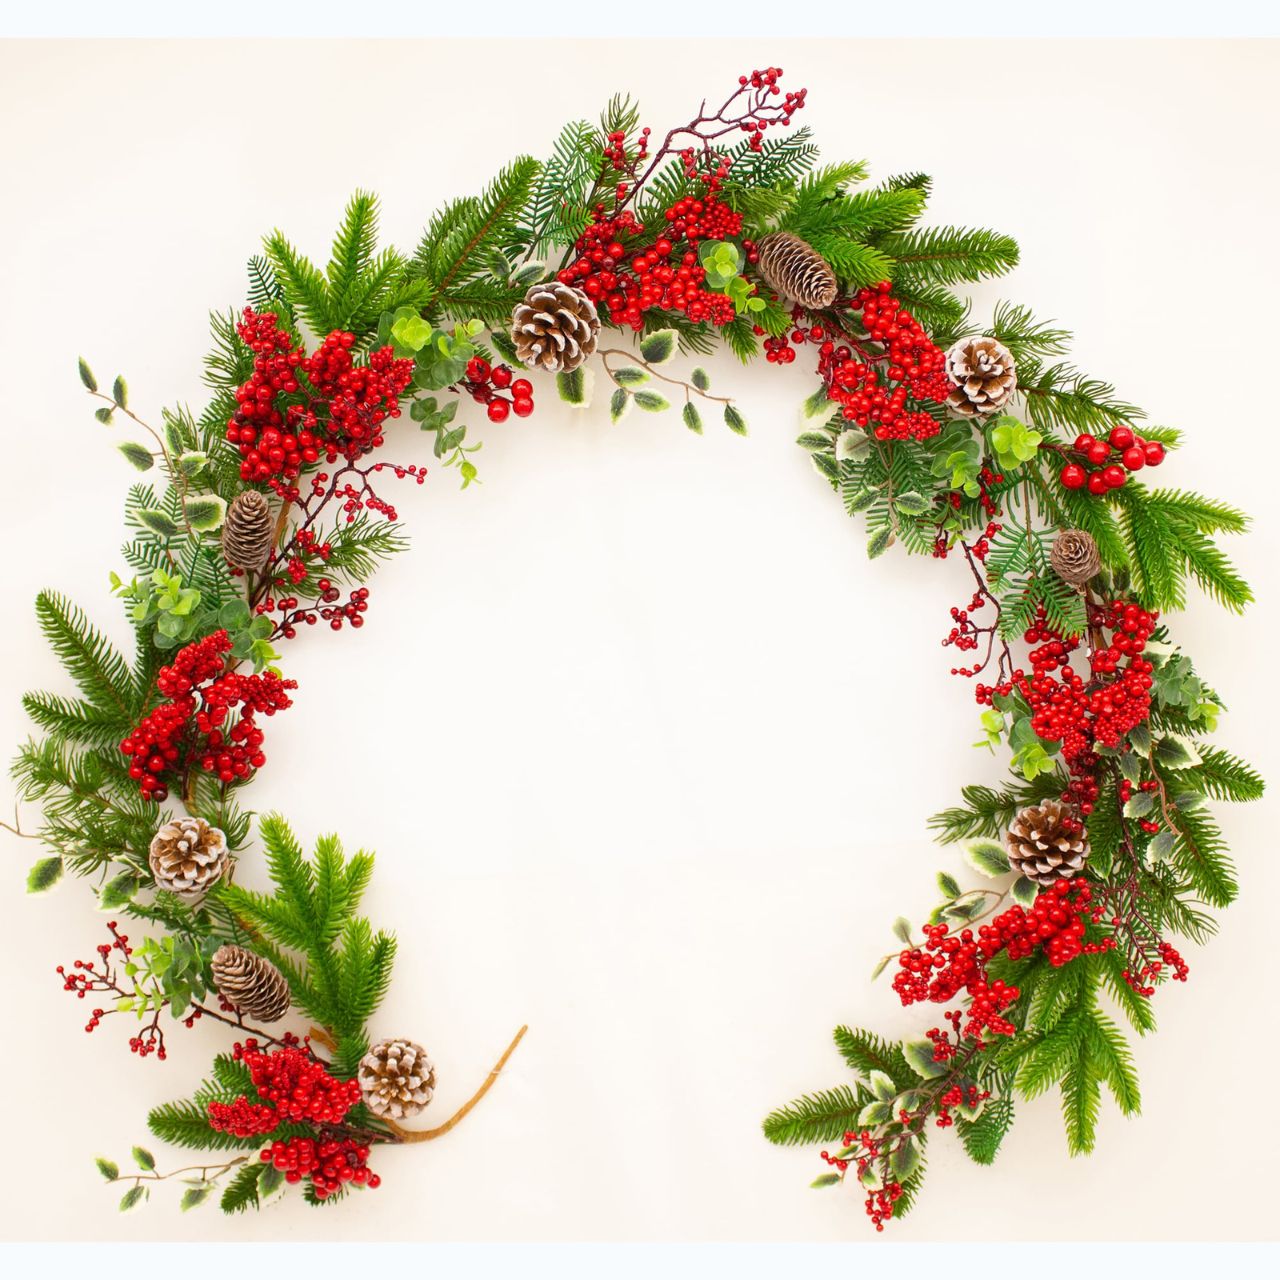 Enchante Festive Gatherings Garland 150 cm  The Festive Gatherings Garland is a perfect addition to any celebration. It's crafted with high-quality materials for a long-lasting, eye-catching decoration. Lightweight and durable, it easily hangs to provide a festive touch to your gathering.